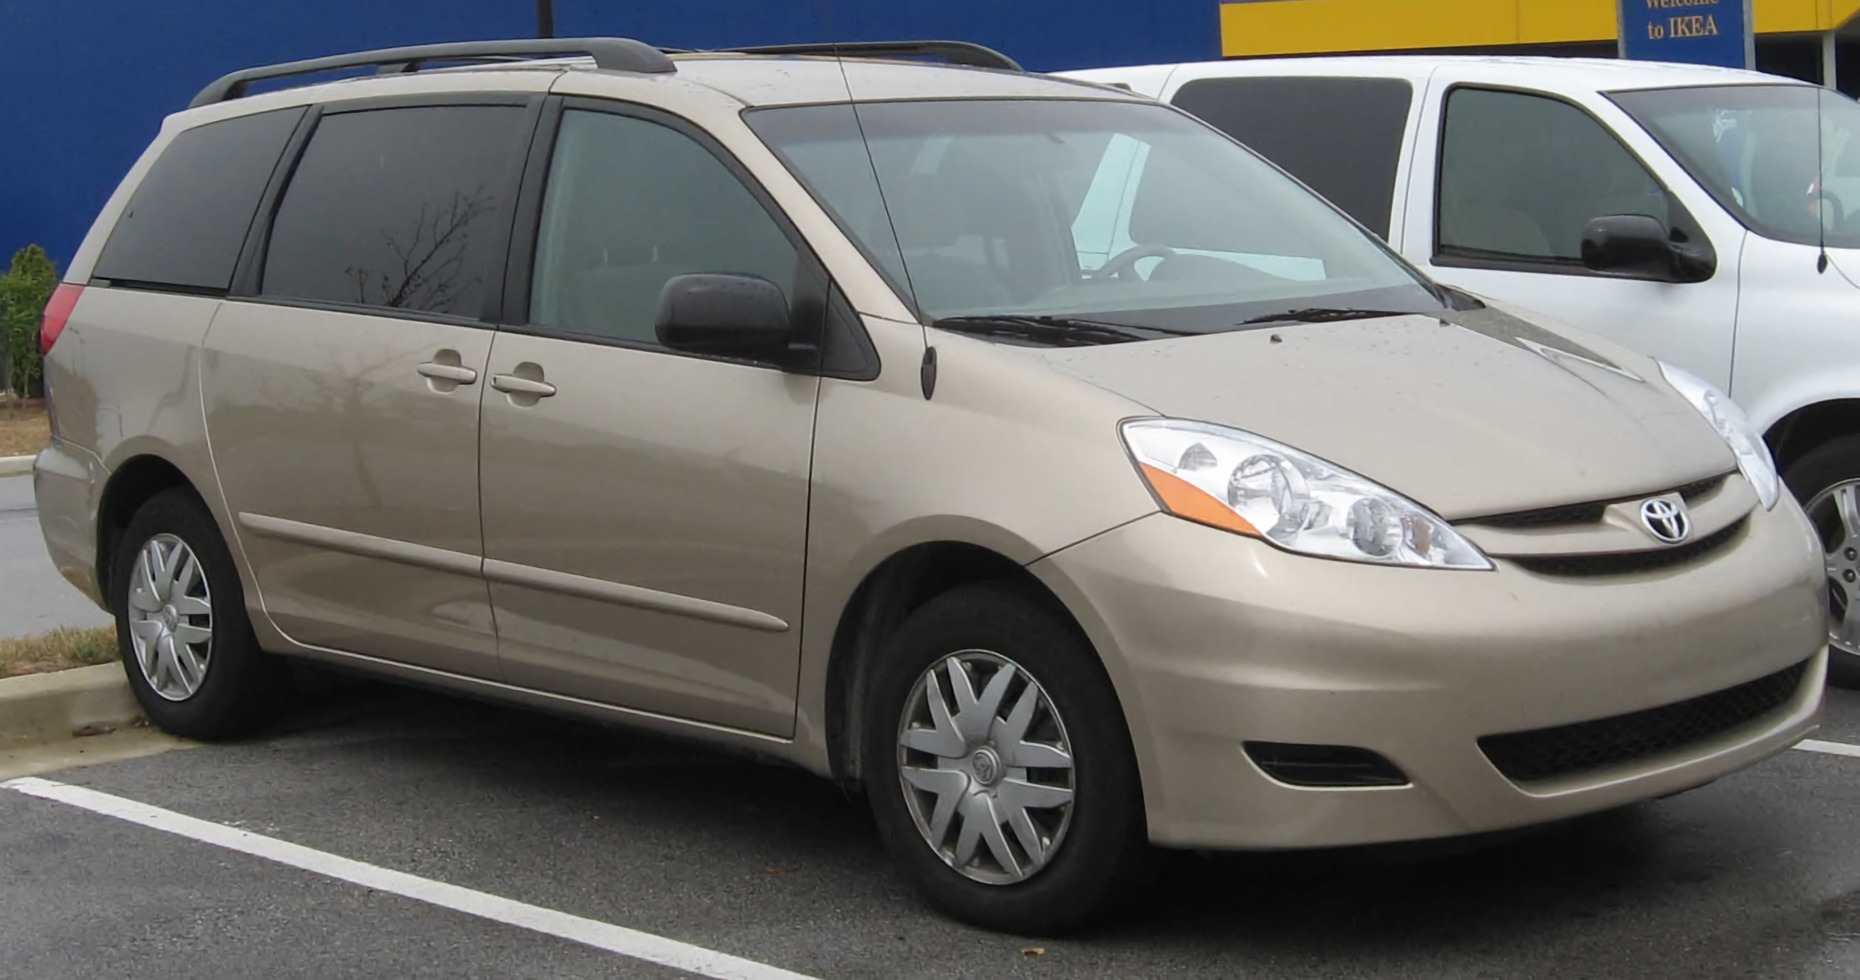 File:2006-07 Toyota Sienna LE (cropped).jpg - Wikimedia Commons